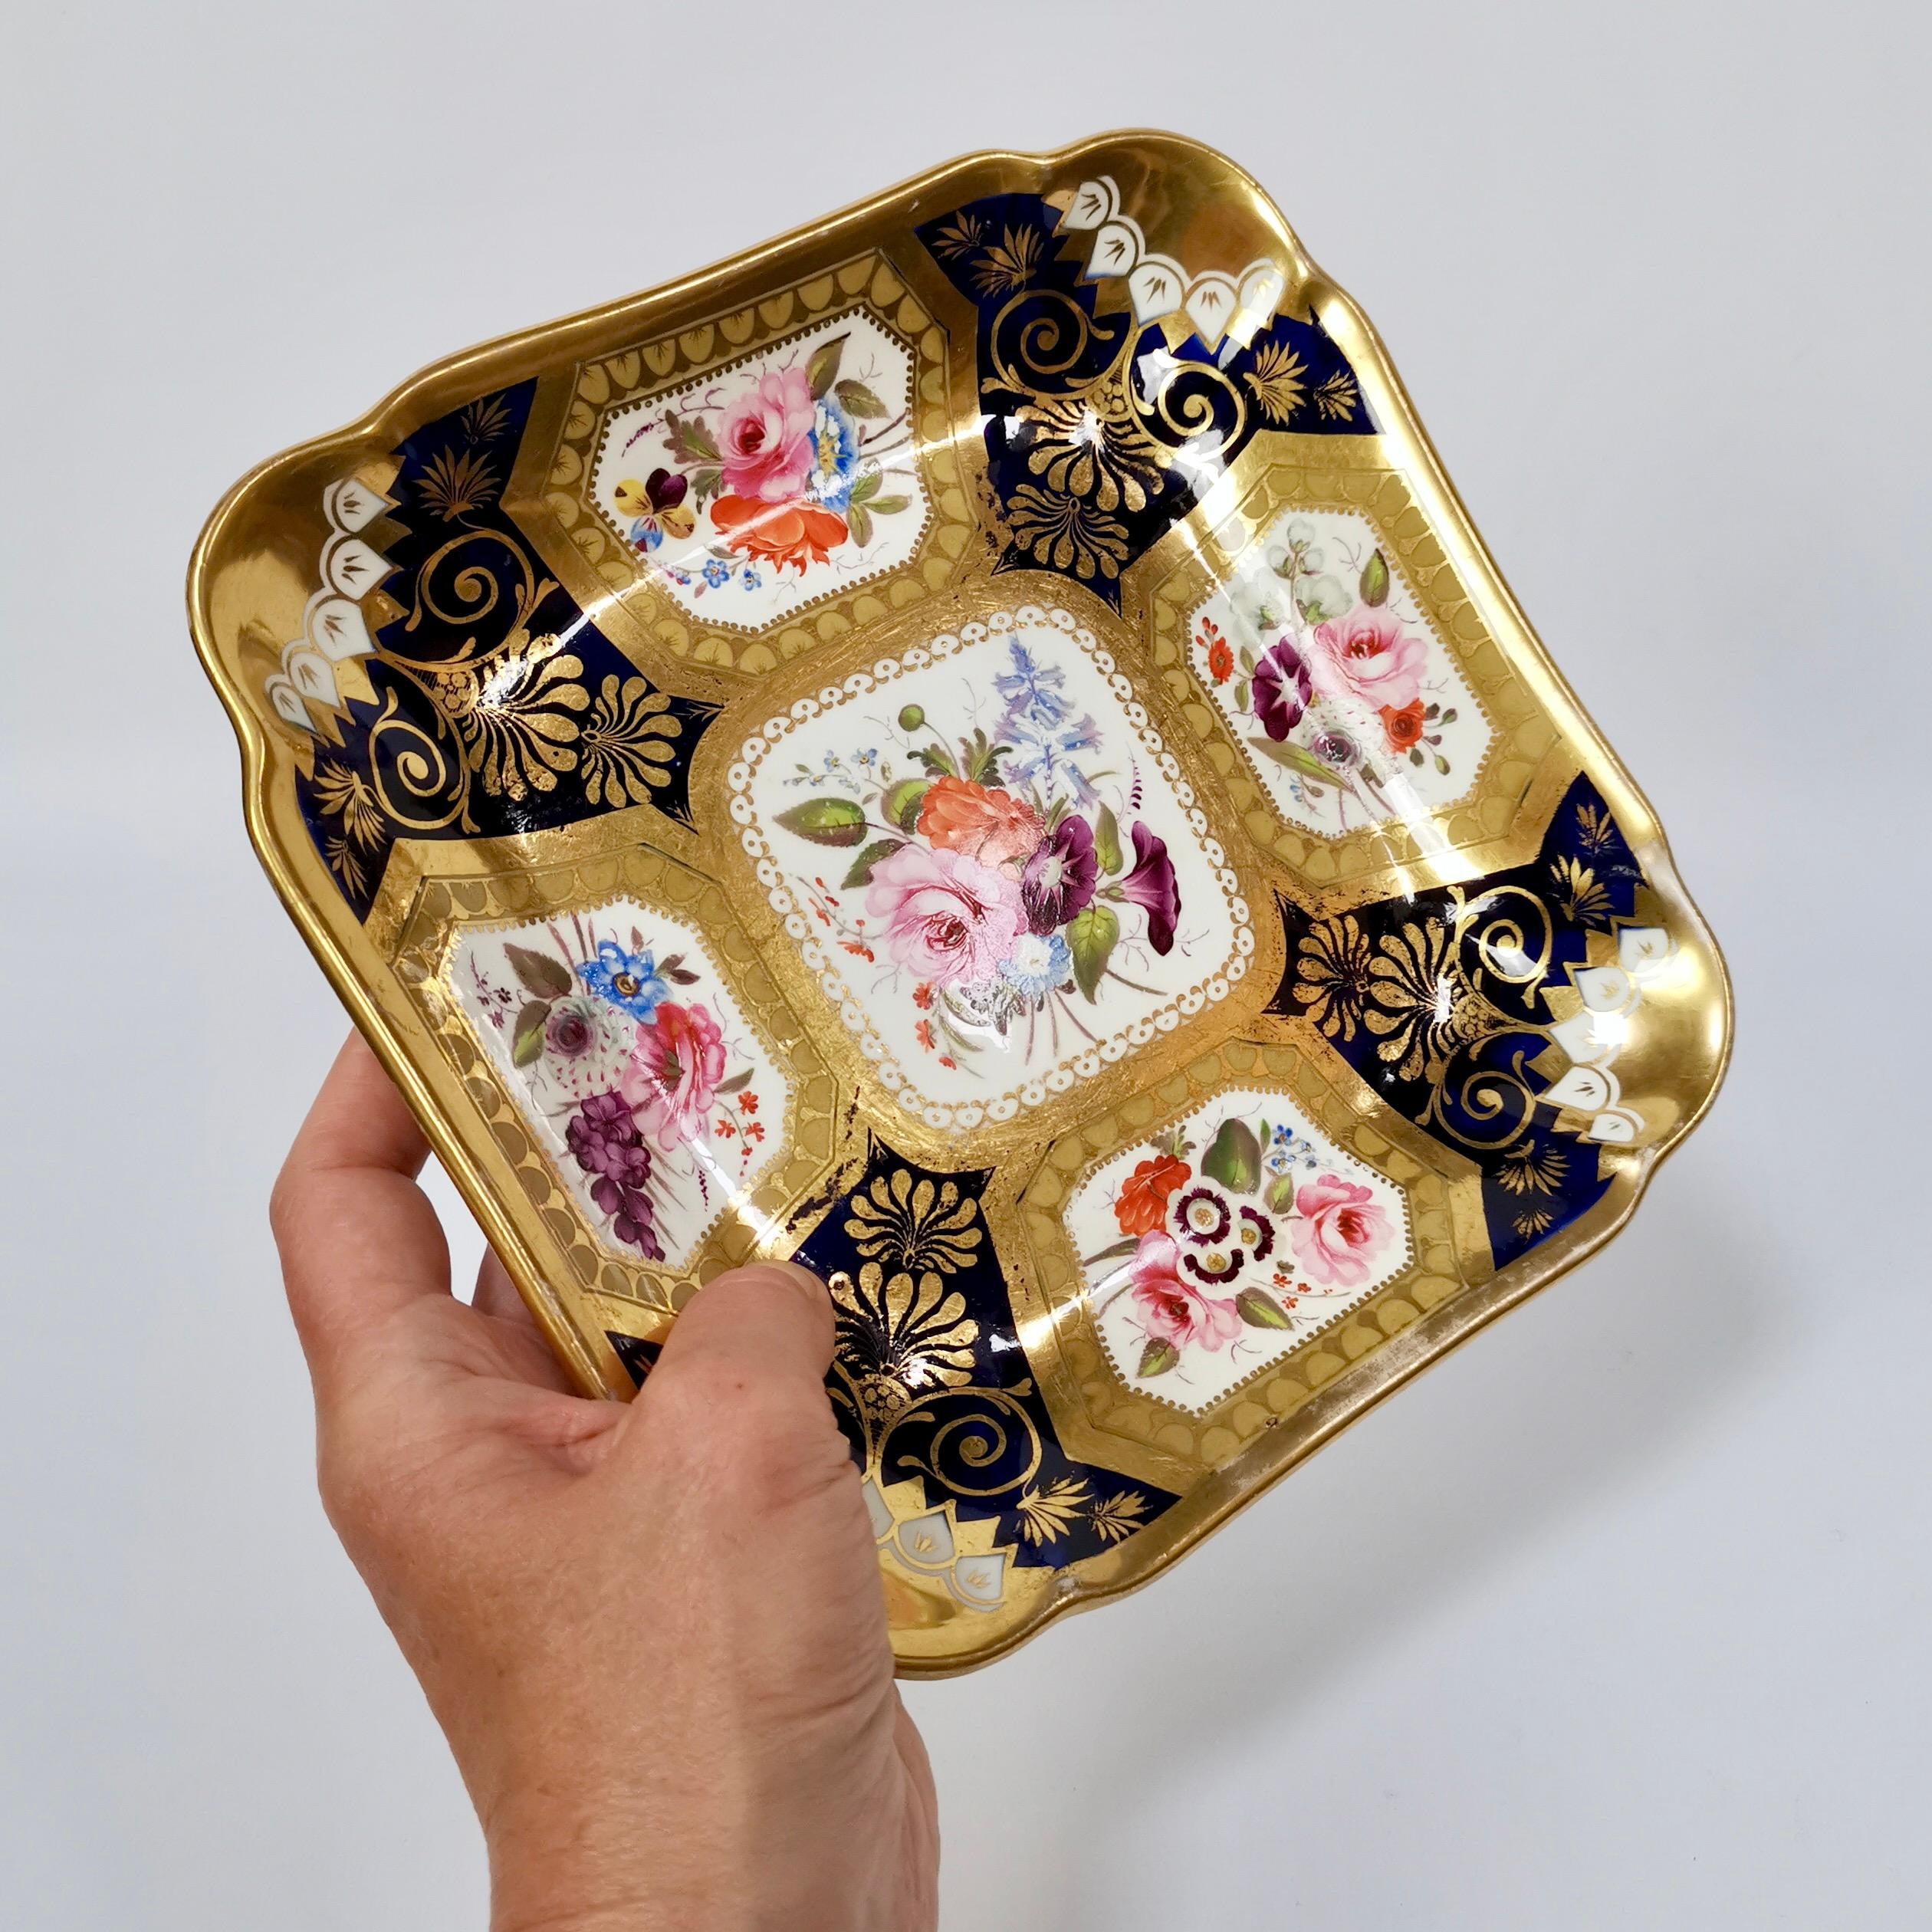 This is a beautiful square dessert dish made by Hicks & Meigh in about 1820. The dish has a deep cobalt blue ground, lavish gilding and panels with beautiful hand painted flowers.

Hicks & Meigh was one of the many china factories in early 19th